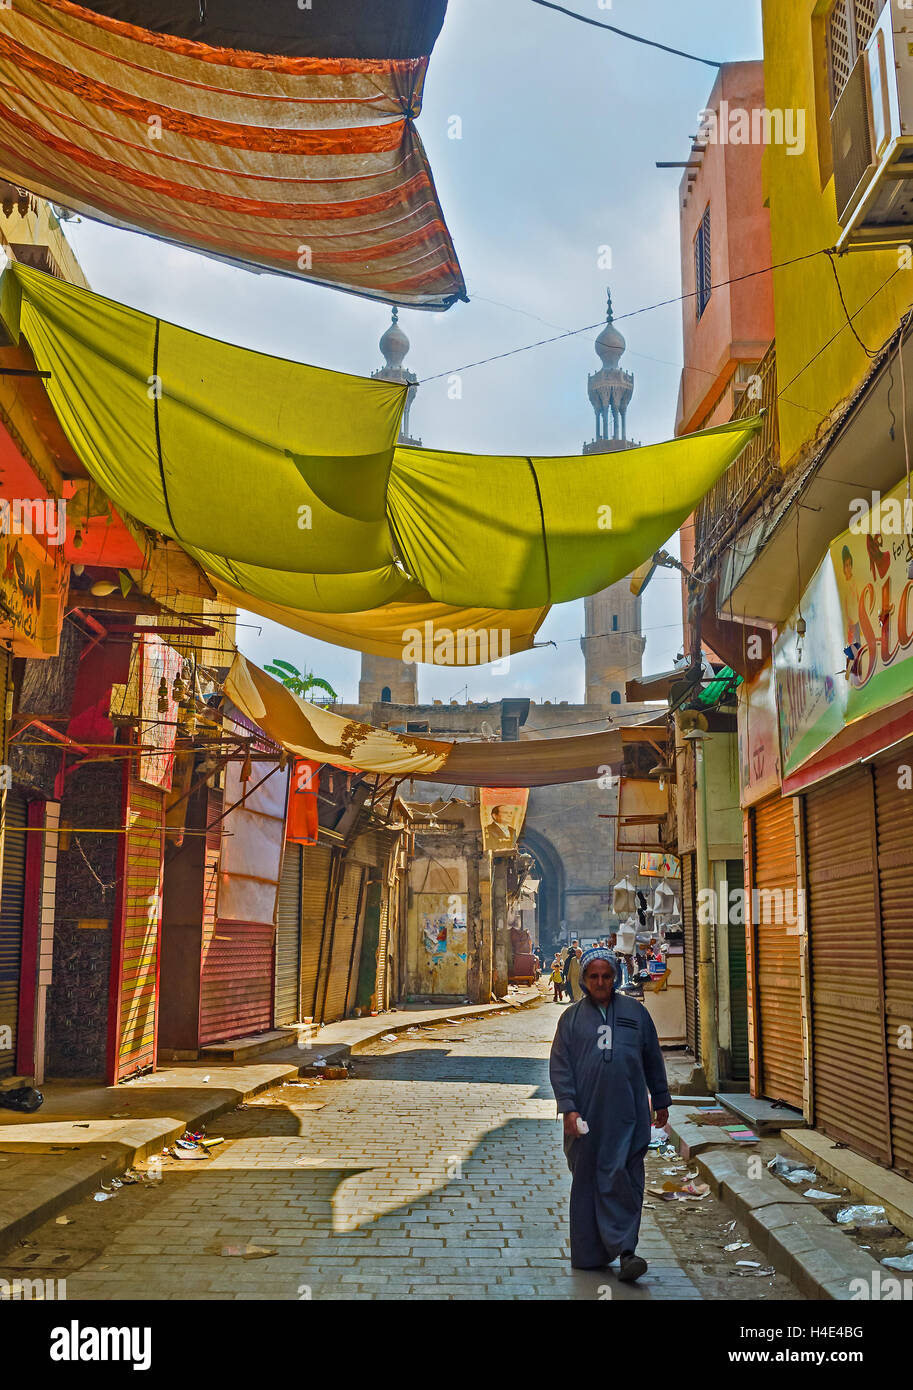 The merchants of Al-Muizz street market use colorful cloth to make the sunshades over the stalls, Cairo Egypt Stock Photo